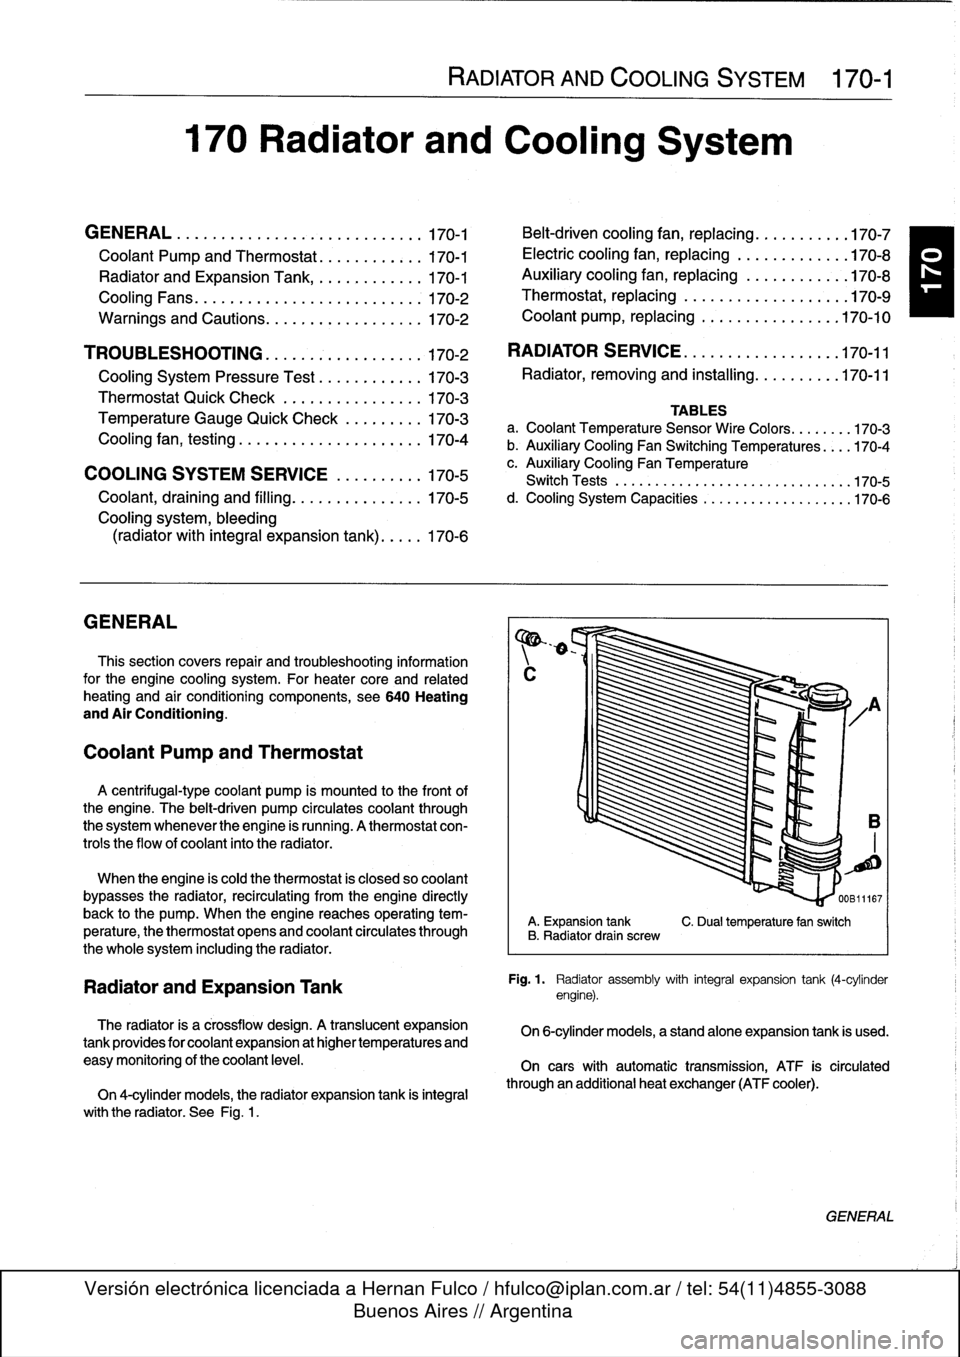 BMW 325i 1993 E36 Owners Guide 170
Radiator
and
Cooling
System

GENERAL
.
.
.....
.
...
.
.
.
.
.
....
.
.
.
.
.
.
.
.170-1

Coolant
Pump
and
Thermostat
........
.
.
.
.
170-1

Radiator
and
Expansion
Tank
.........
.
...
170-1

Coo